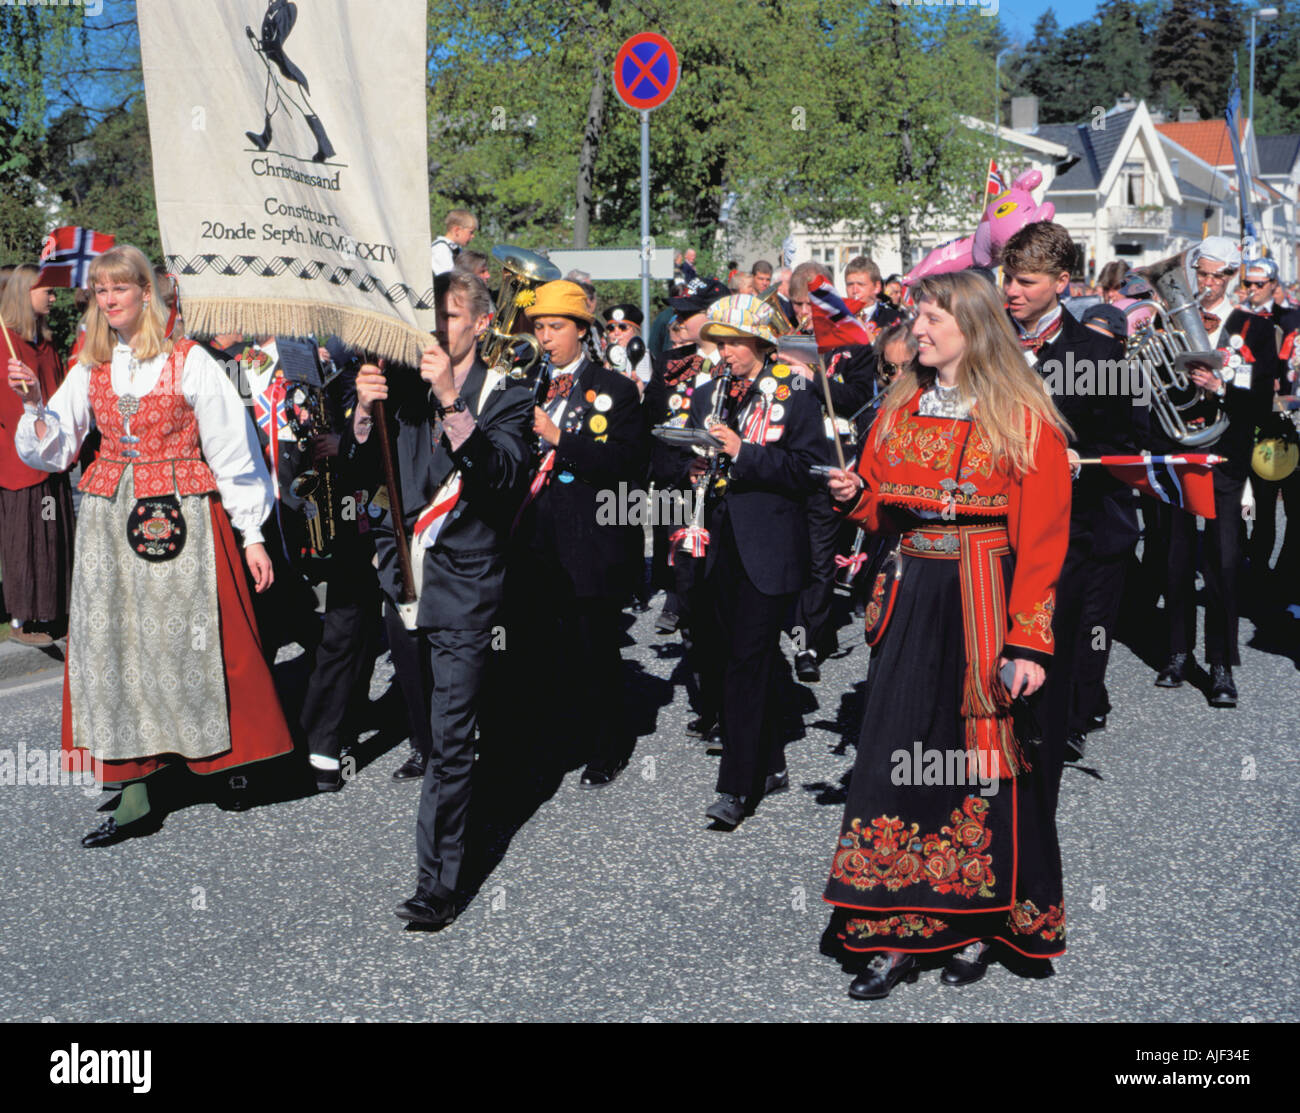 17th May (Constitution Day) celebrations, Kristiansand, Vest-Agder, Norway. Stock Photo